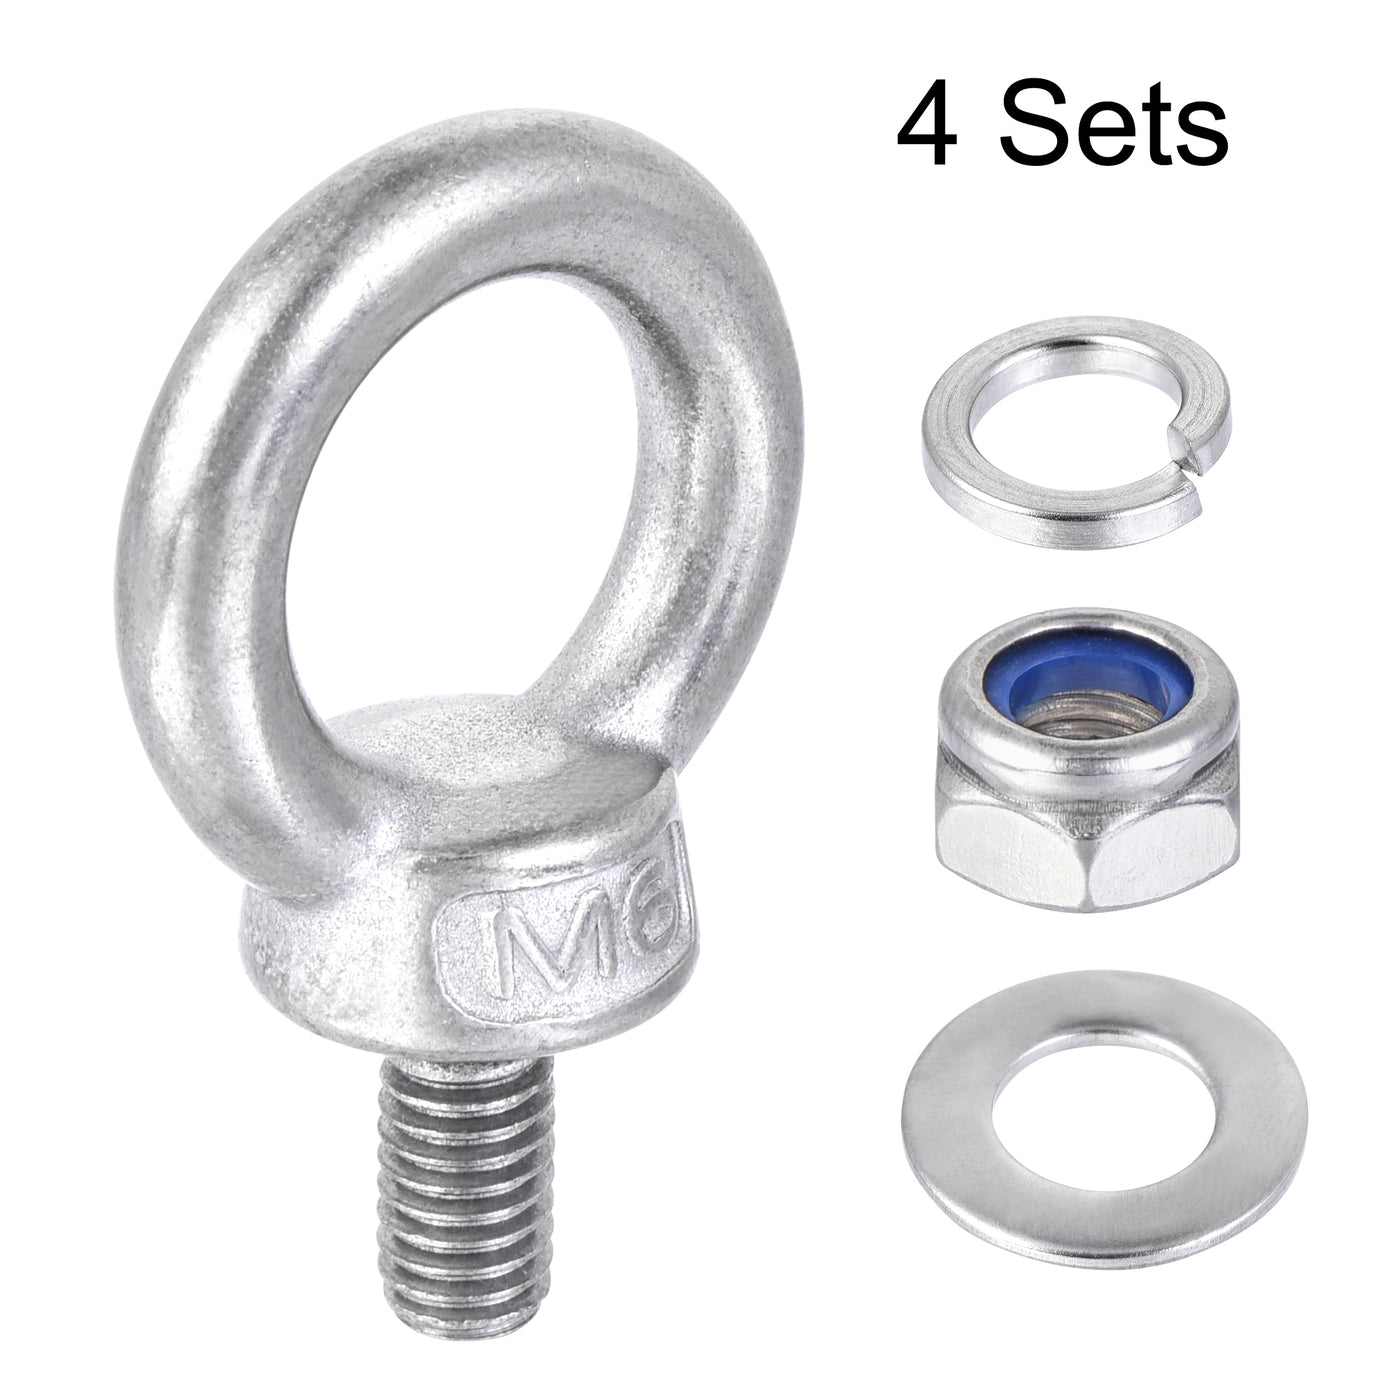 uxcell Uxcell Lifting Eye Bolt M6 x 12mm Male Thread with Hex Screw Nut Gasket Flat Washer for Hanging, 304 Stainless Steel, 4 Sets